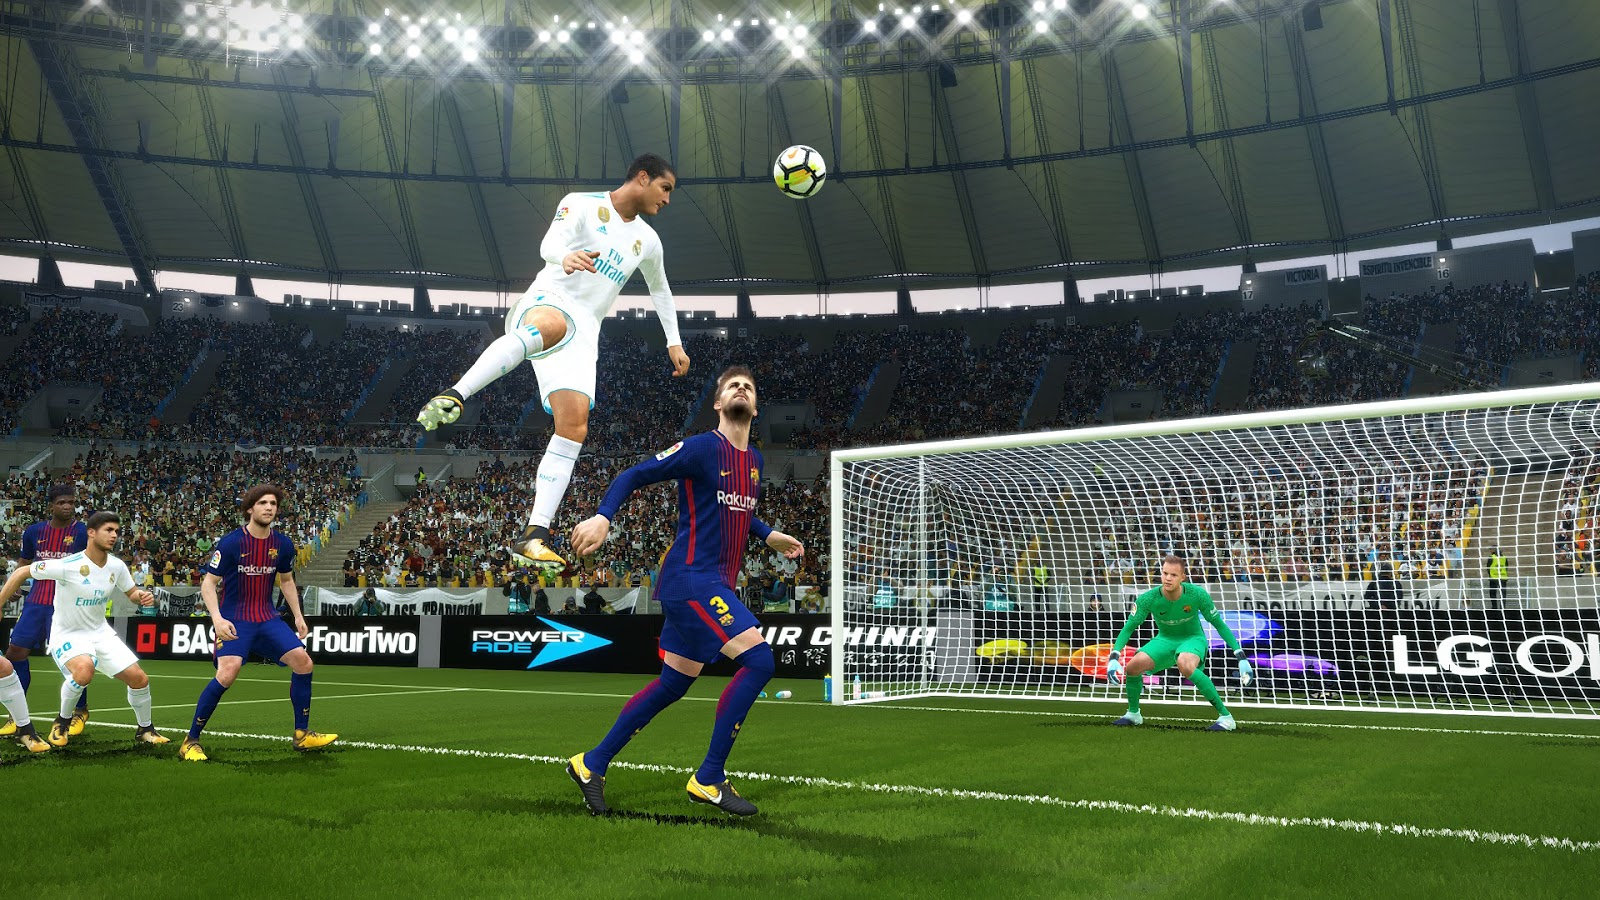 Pes 06 2018 Patch Download